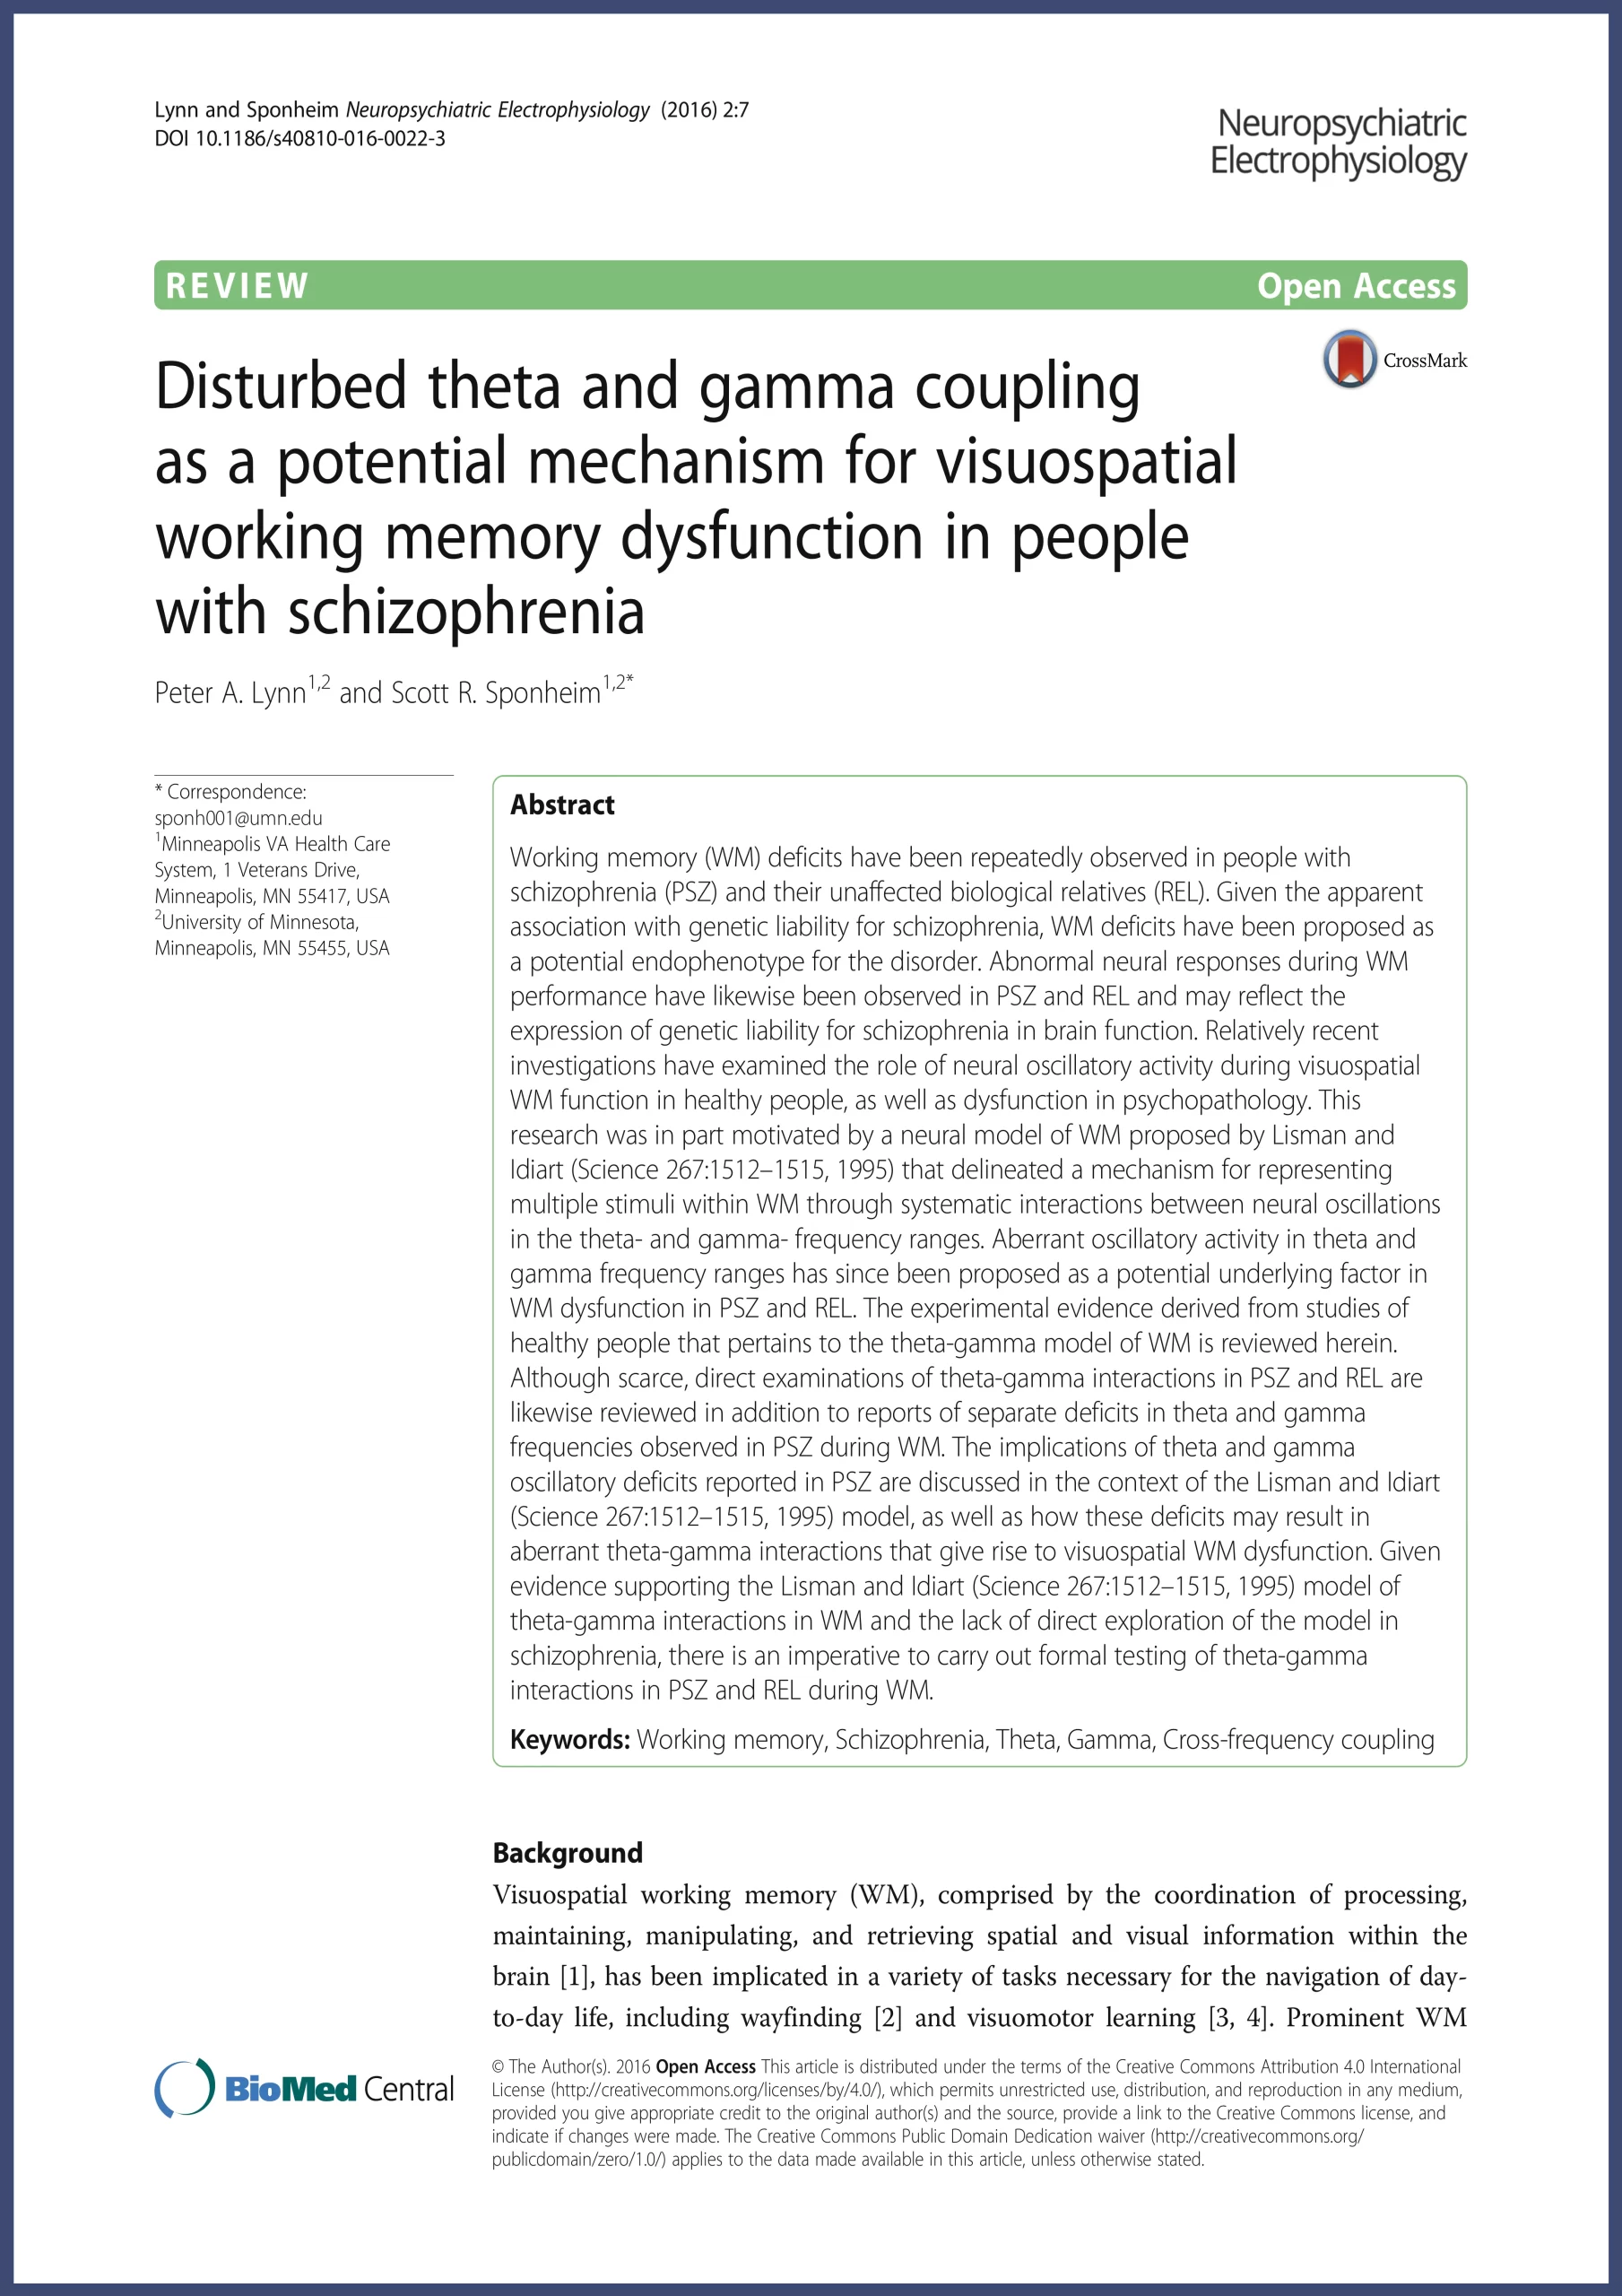 Disturbed theta and gamma coupling as a potential mechanism for visuospatial working memory dysfunction in people with schizophrenia publication by Lynn, 2016